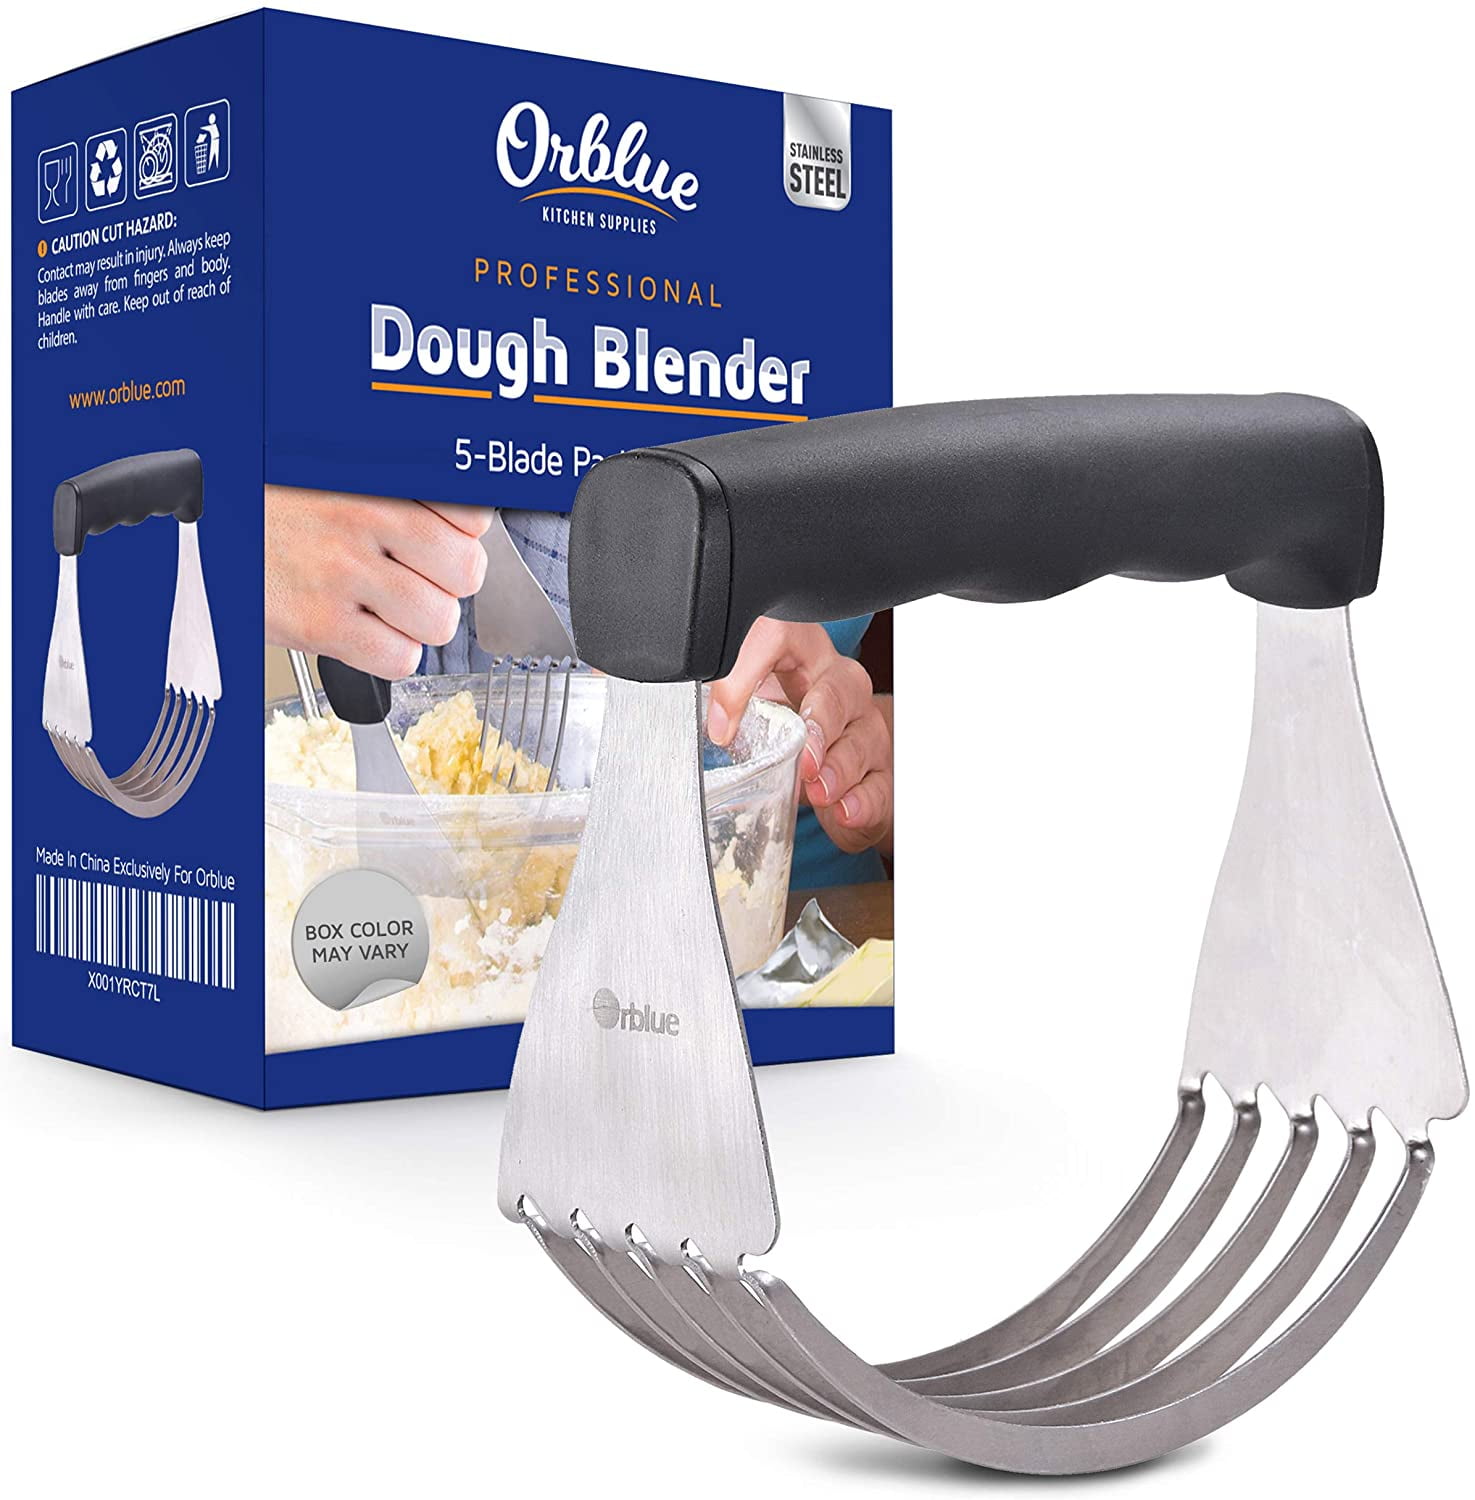 Orblue Stainless Steel Dough Blender - Large Pastry Cutter with 5